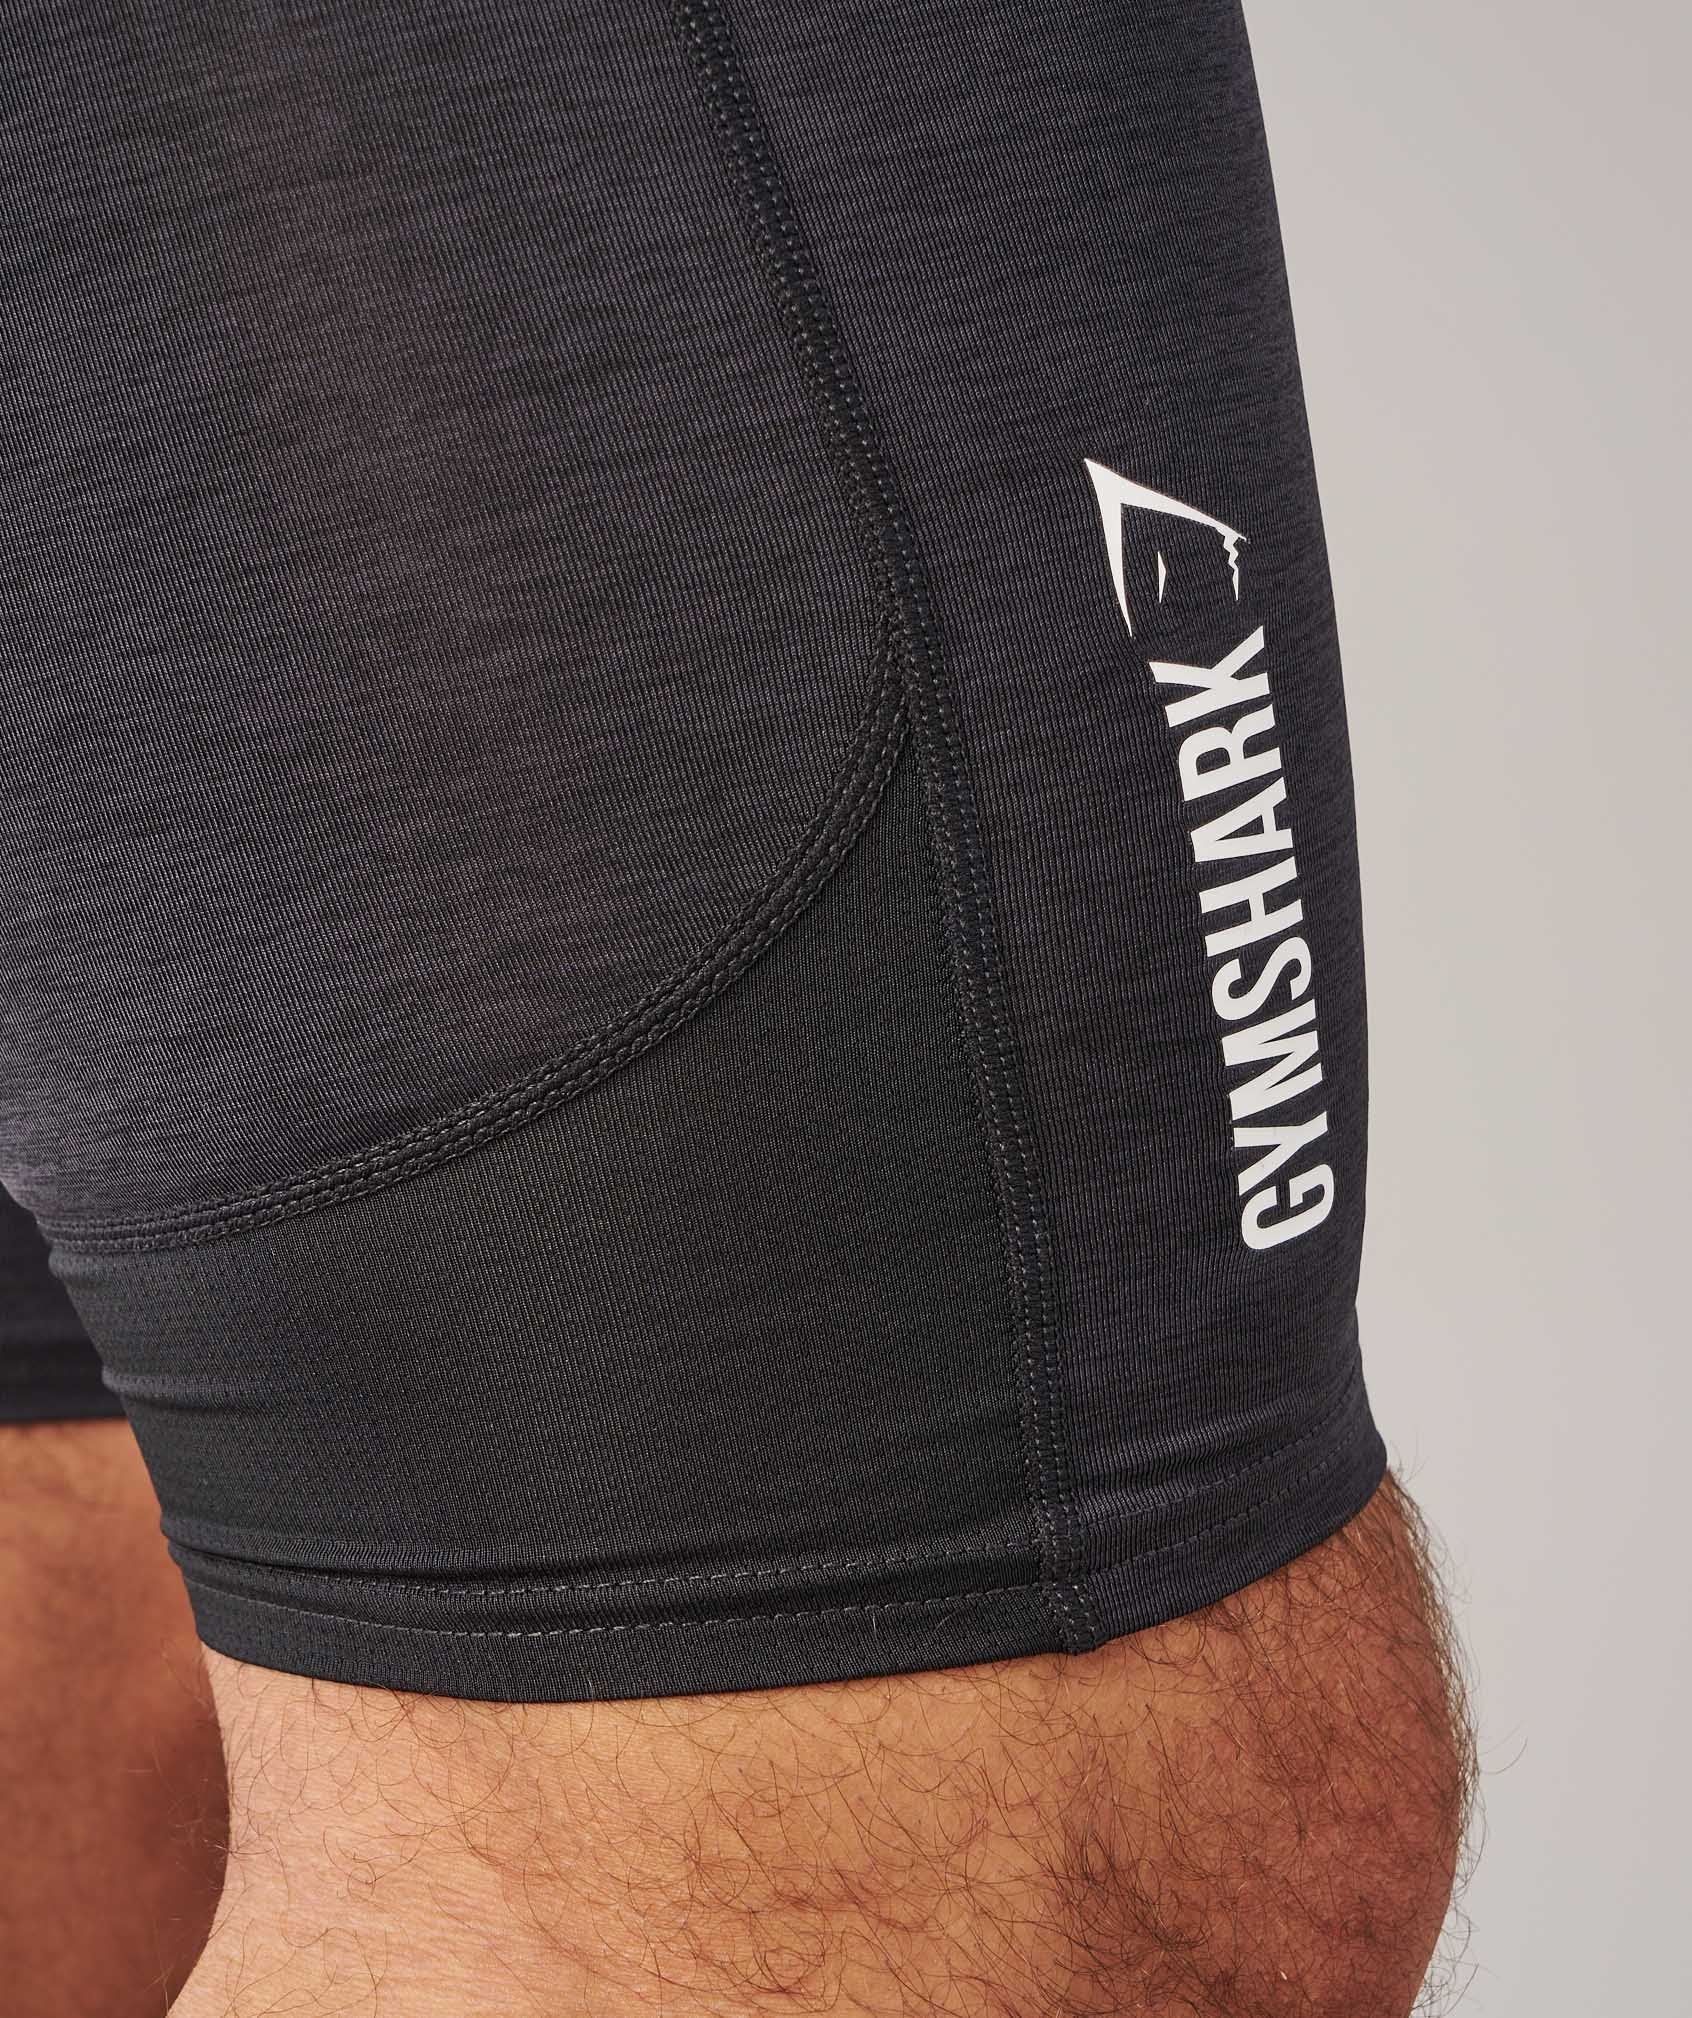 Element Baselayer Shorts in Black Marl - view 6